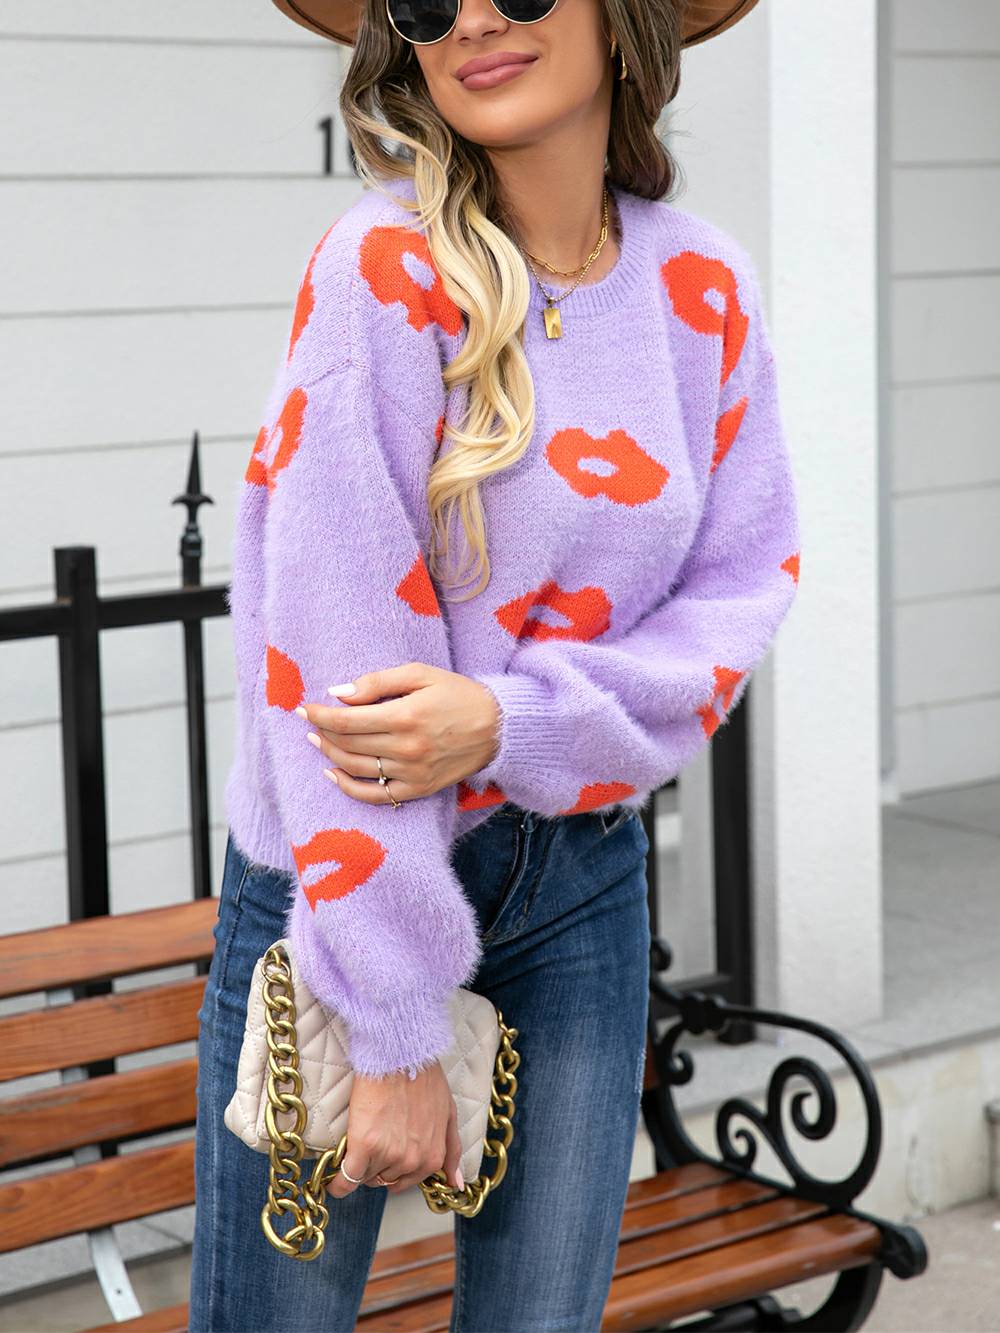 Lips of Love Round Neck Pullover Sweater